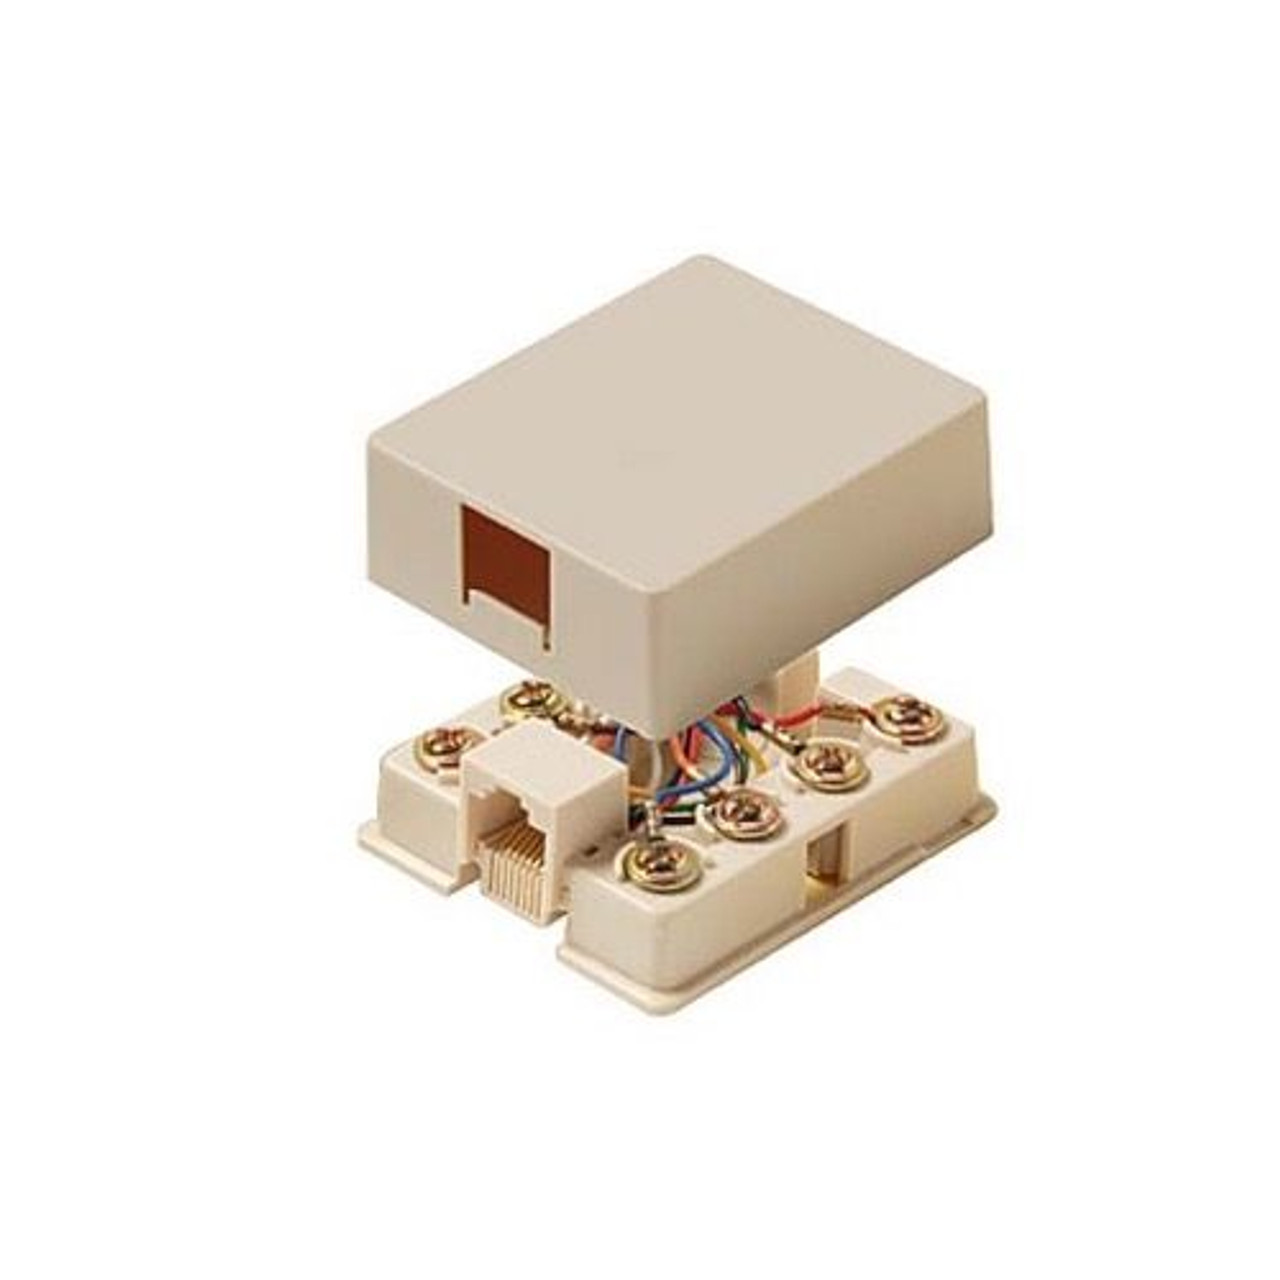 Eagle Telephone Surface Mount Jack Ivory 6 Conductor 6P6C Wire One Port Modular Phone Block Phone Line Cable Connect Wall Box Plug